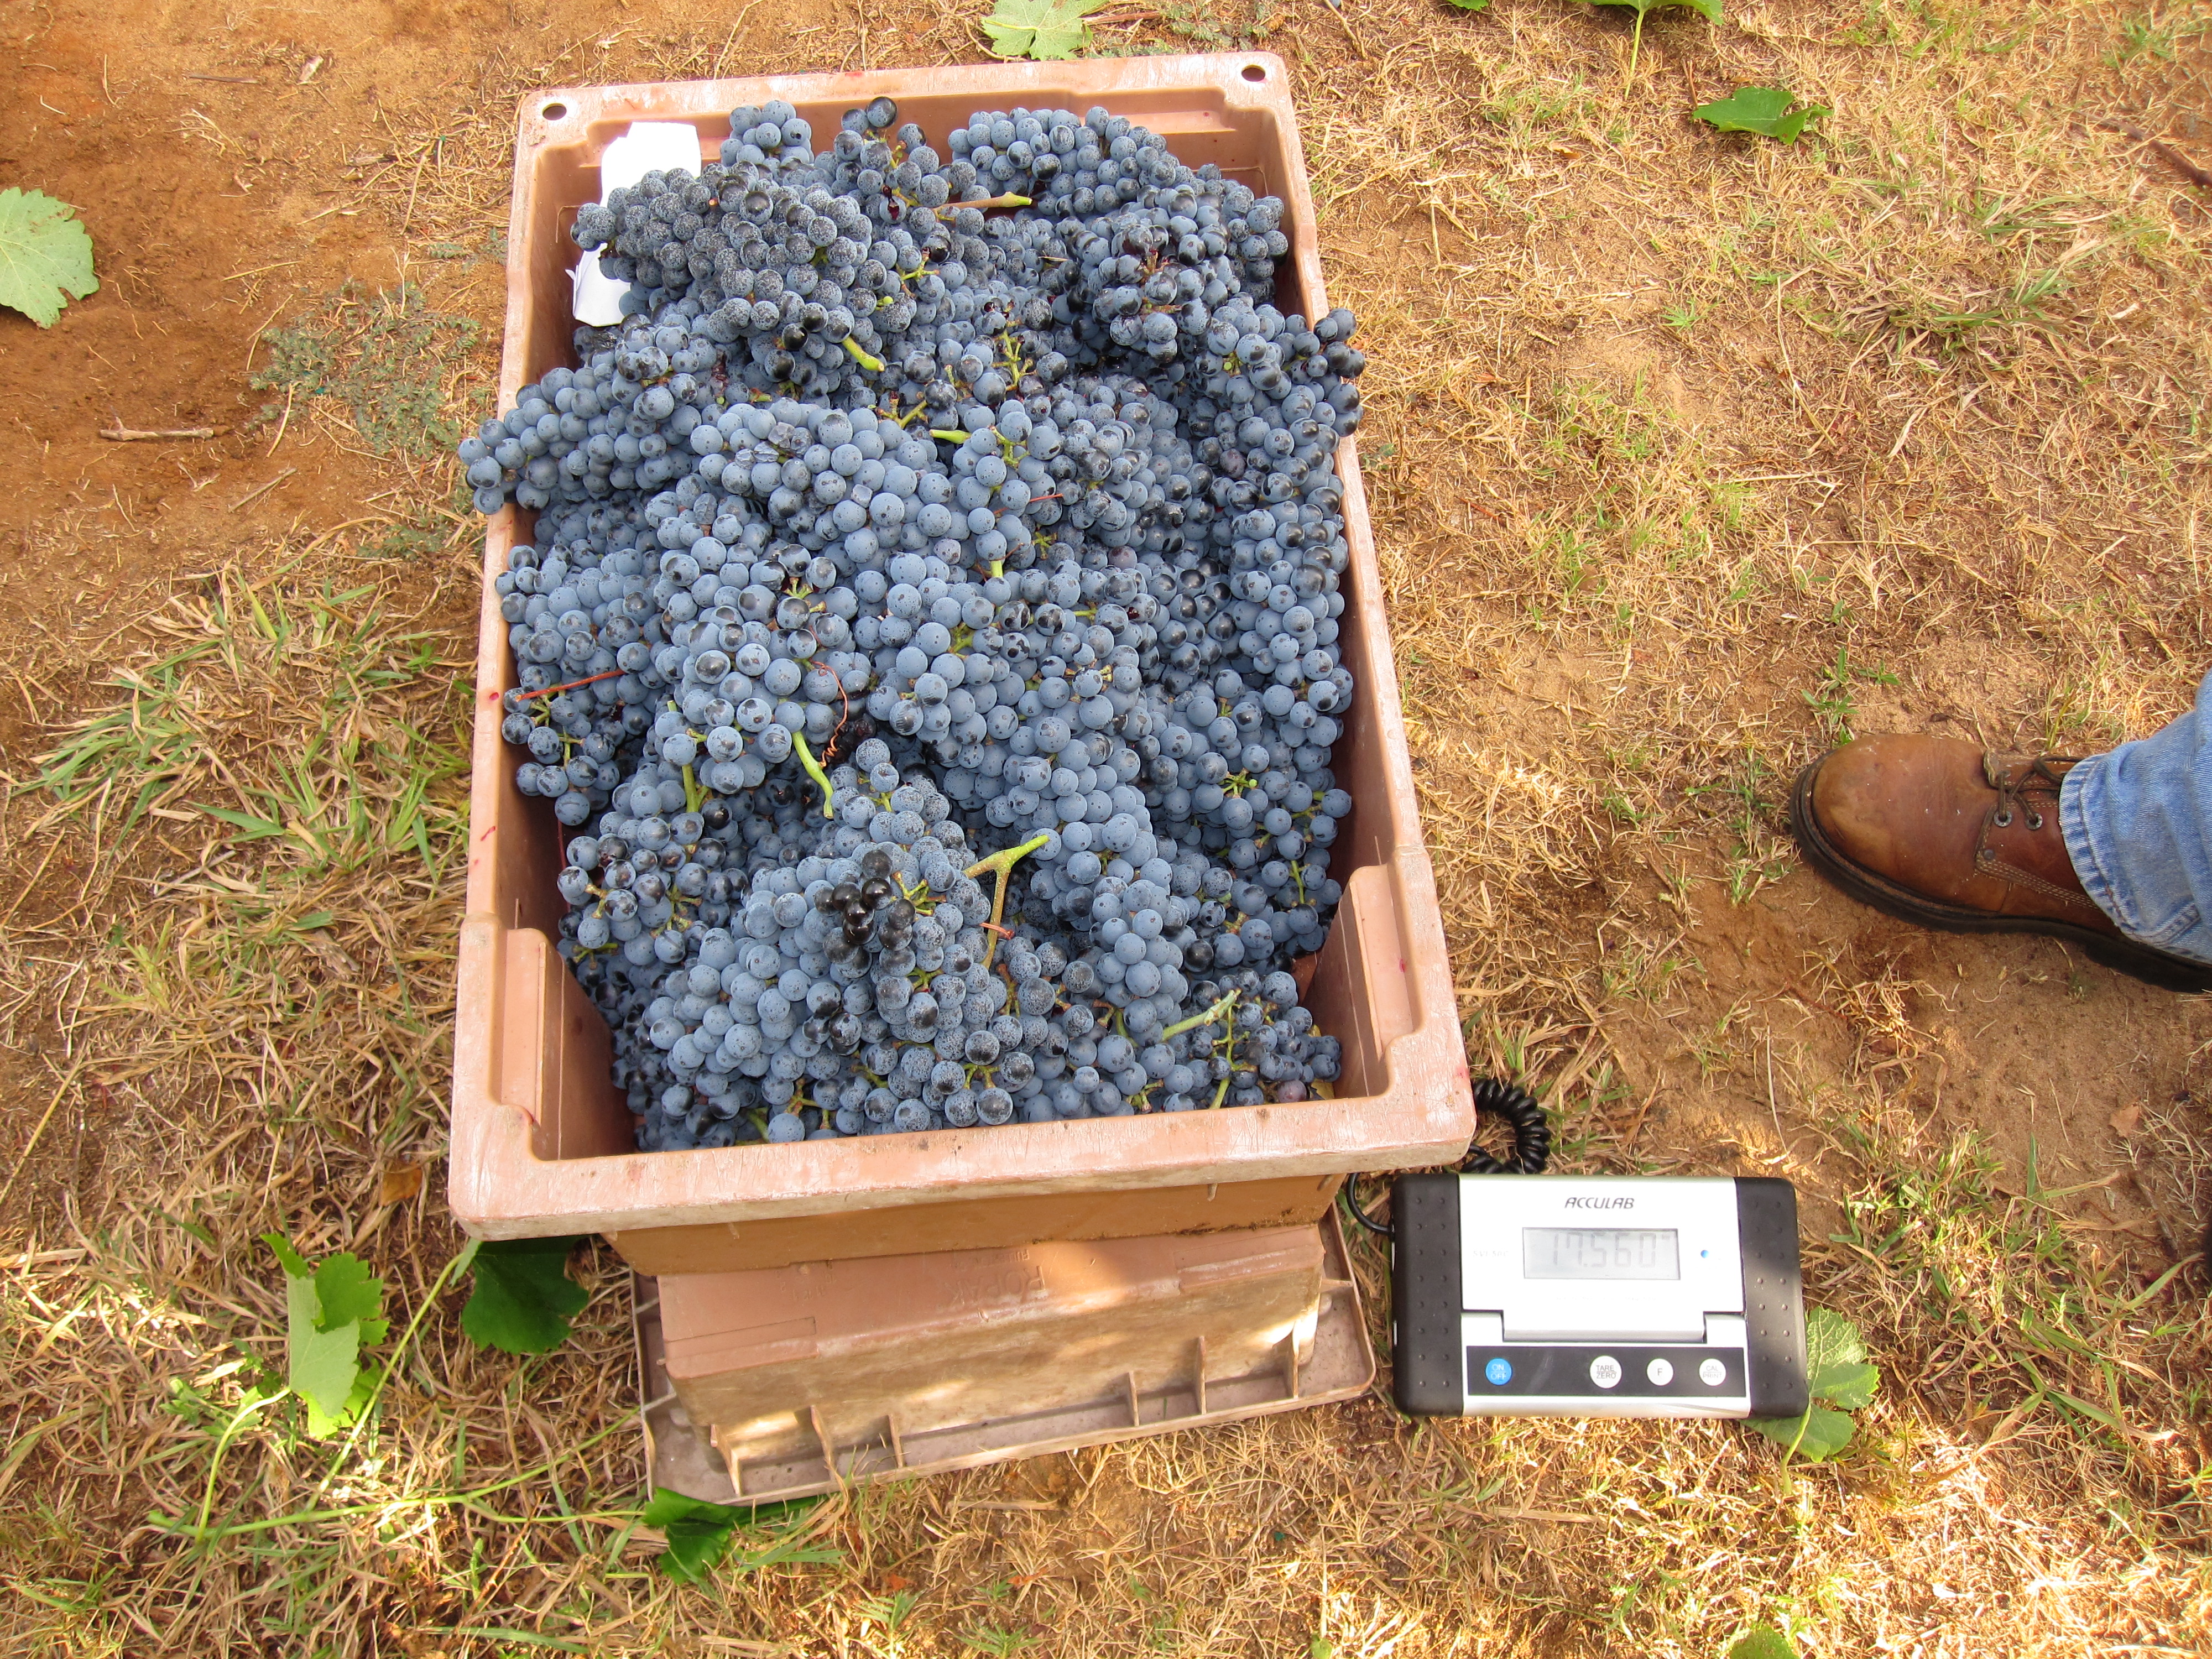 Grapes being weighed